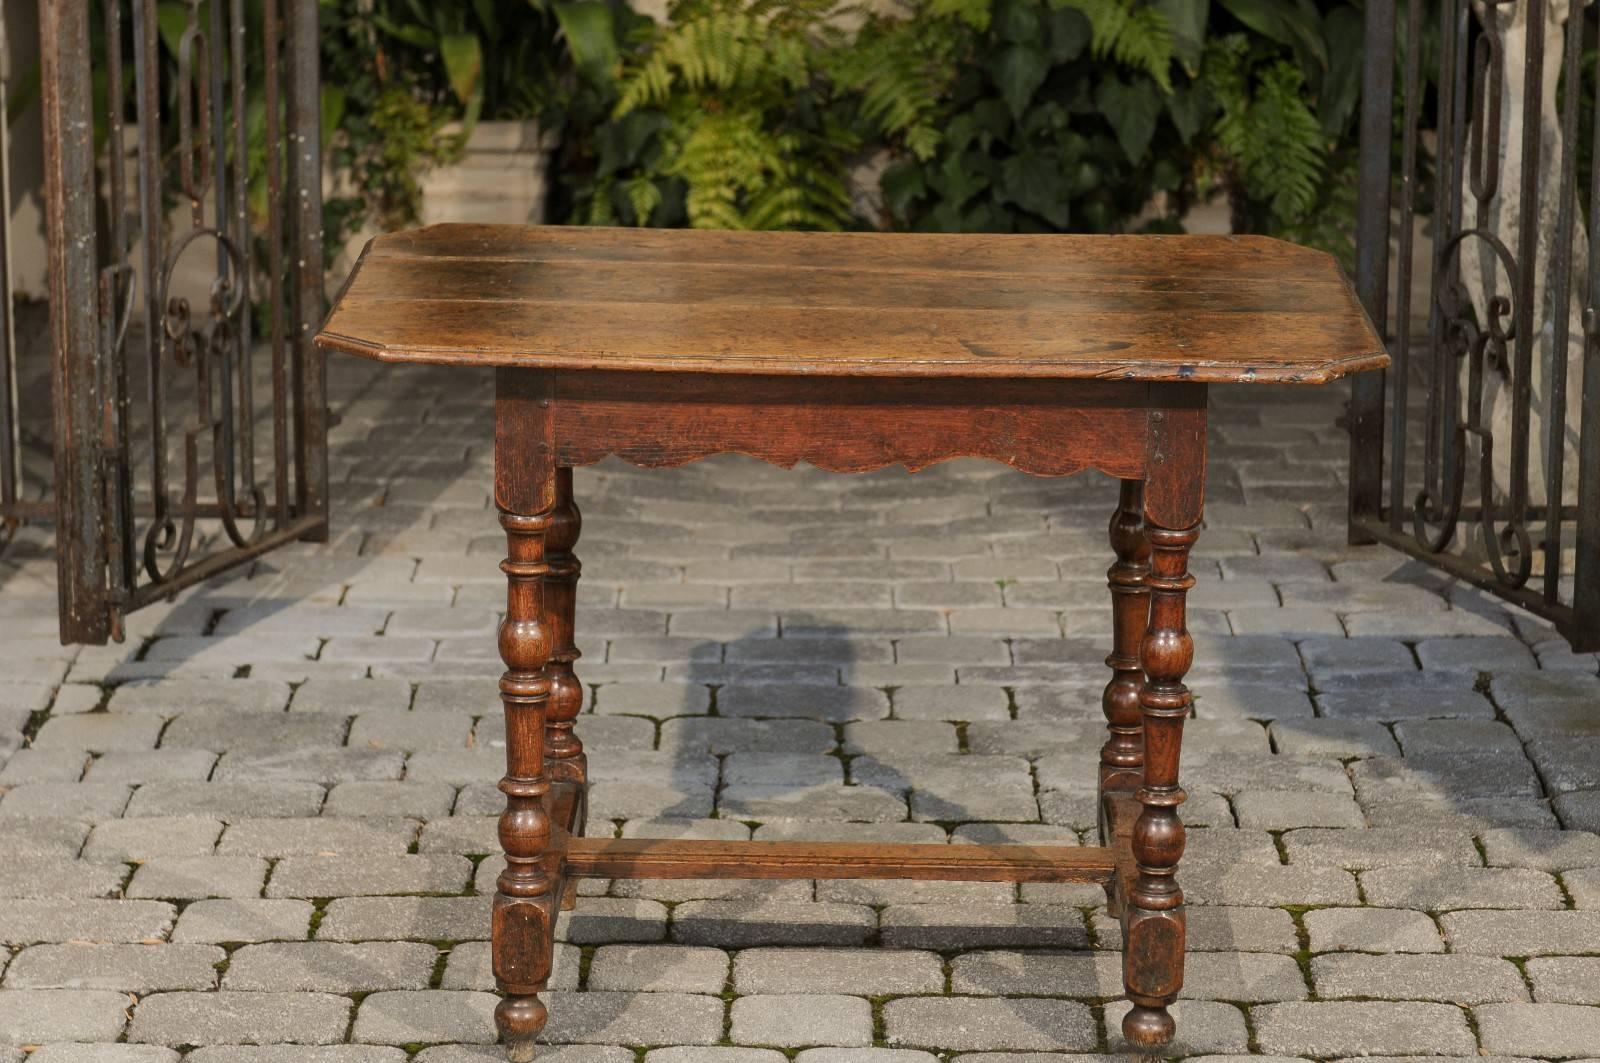 18th Century French Oak Side Table with Turned Legs and Cross Stretcher from the 1780s